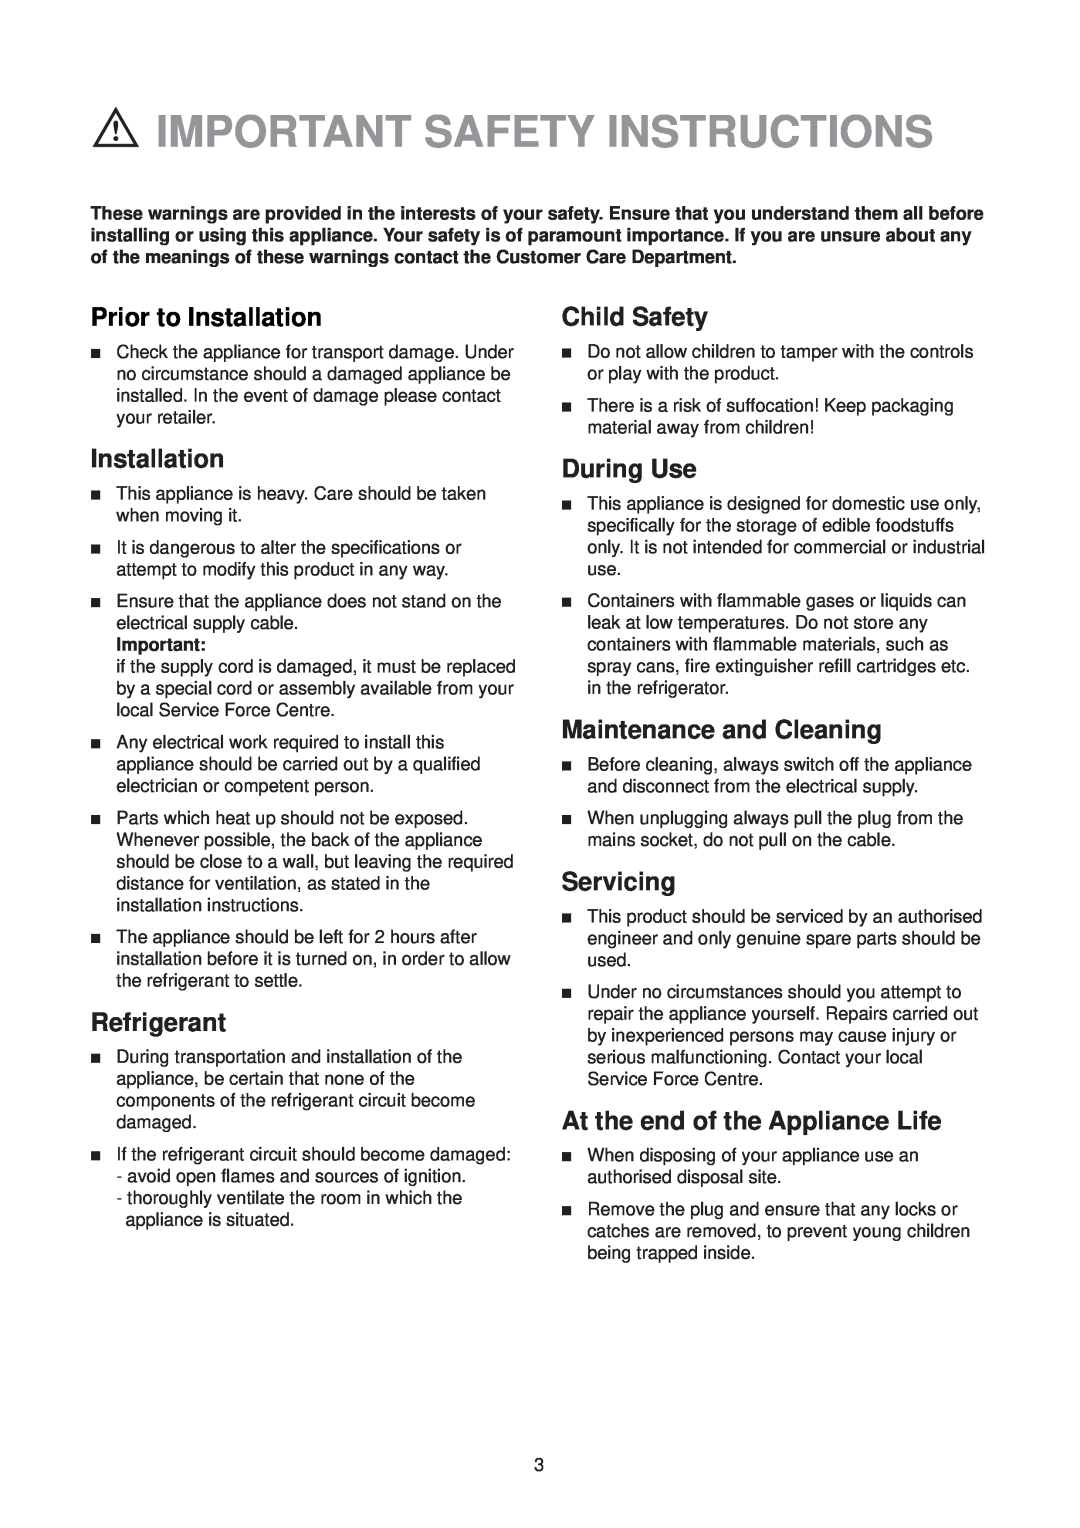 Zanussi ZT 51 RL Important Safety Instructions, Prior to Installation, Child Safety, Refrigerant, During Use, Servicing 